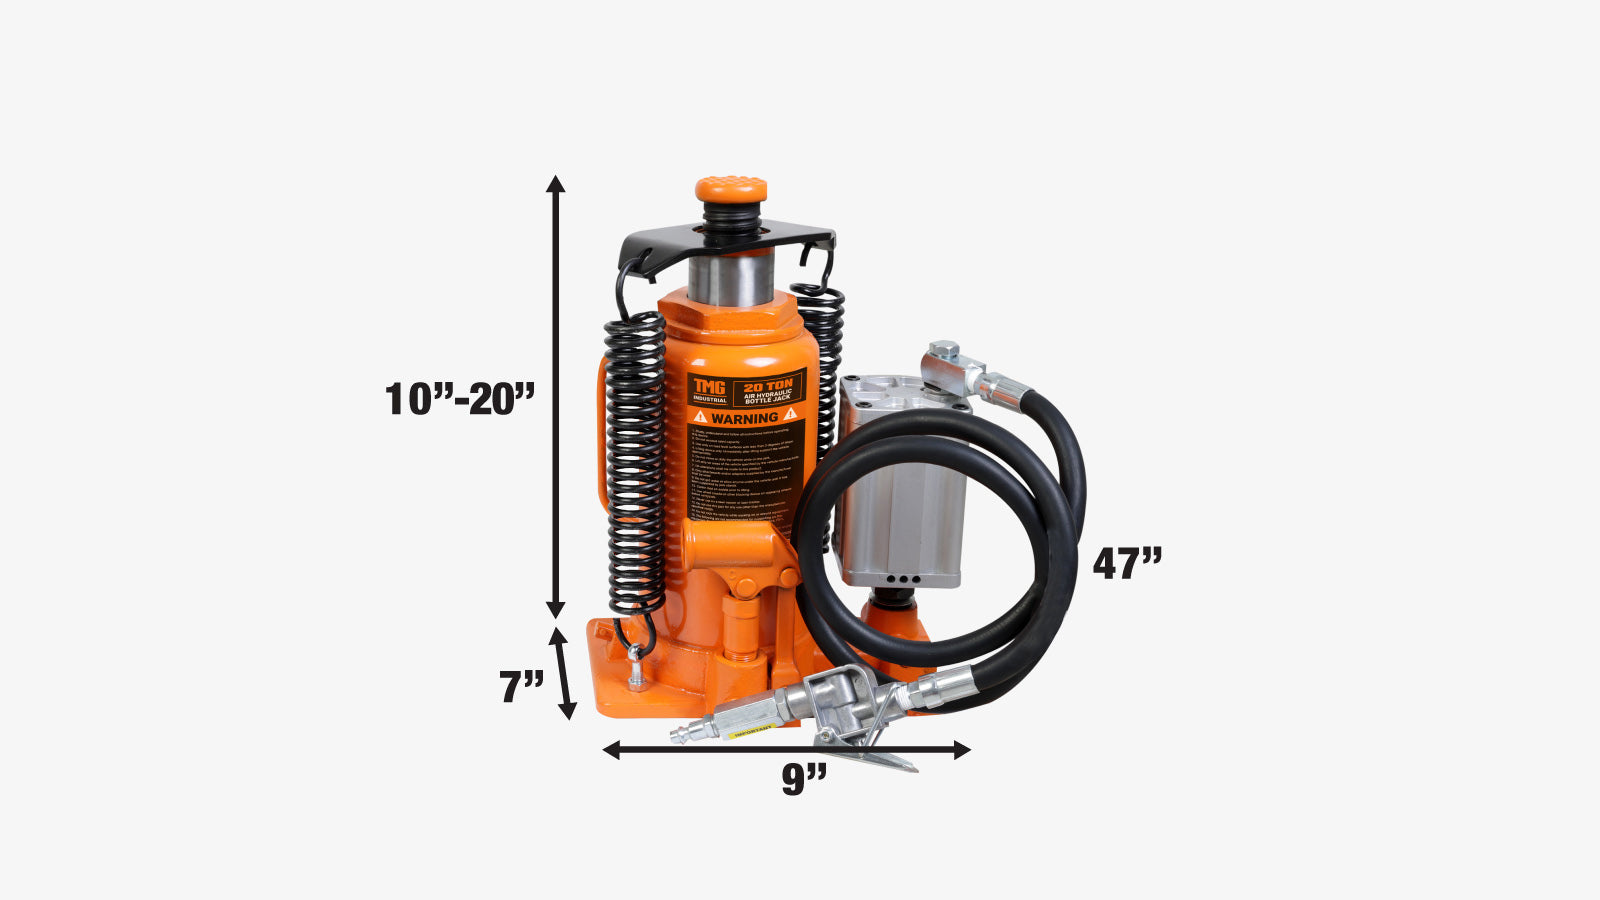 TMG Industrial 20 Ton Air Hydraulic Bottle Jack, Manual & Pneumatic Control, Double Springs, 20” Lift Height, TMG-AJA20-specifications-image